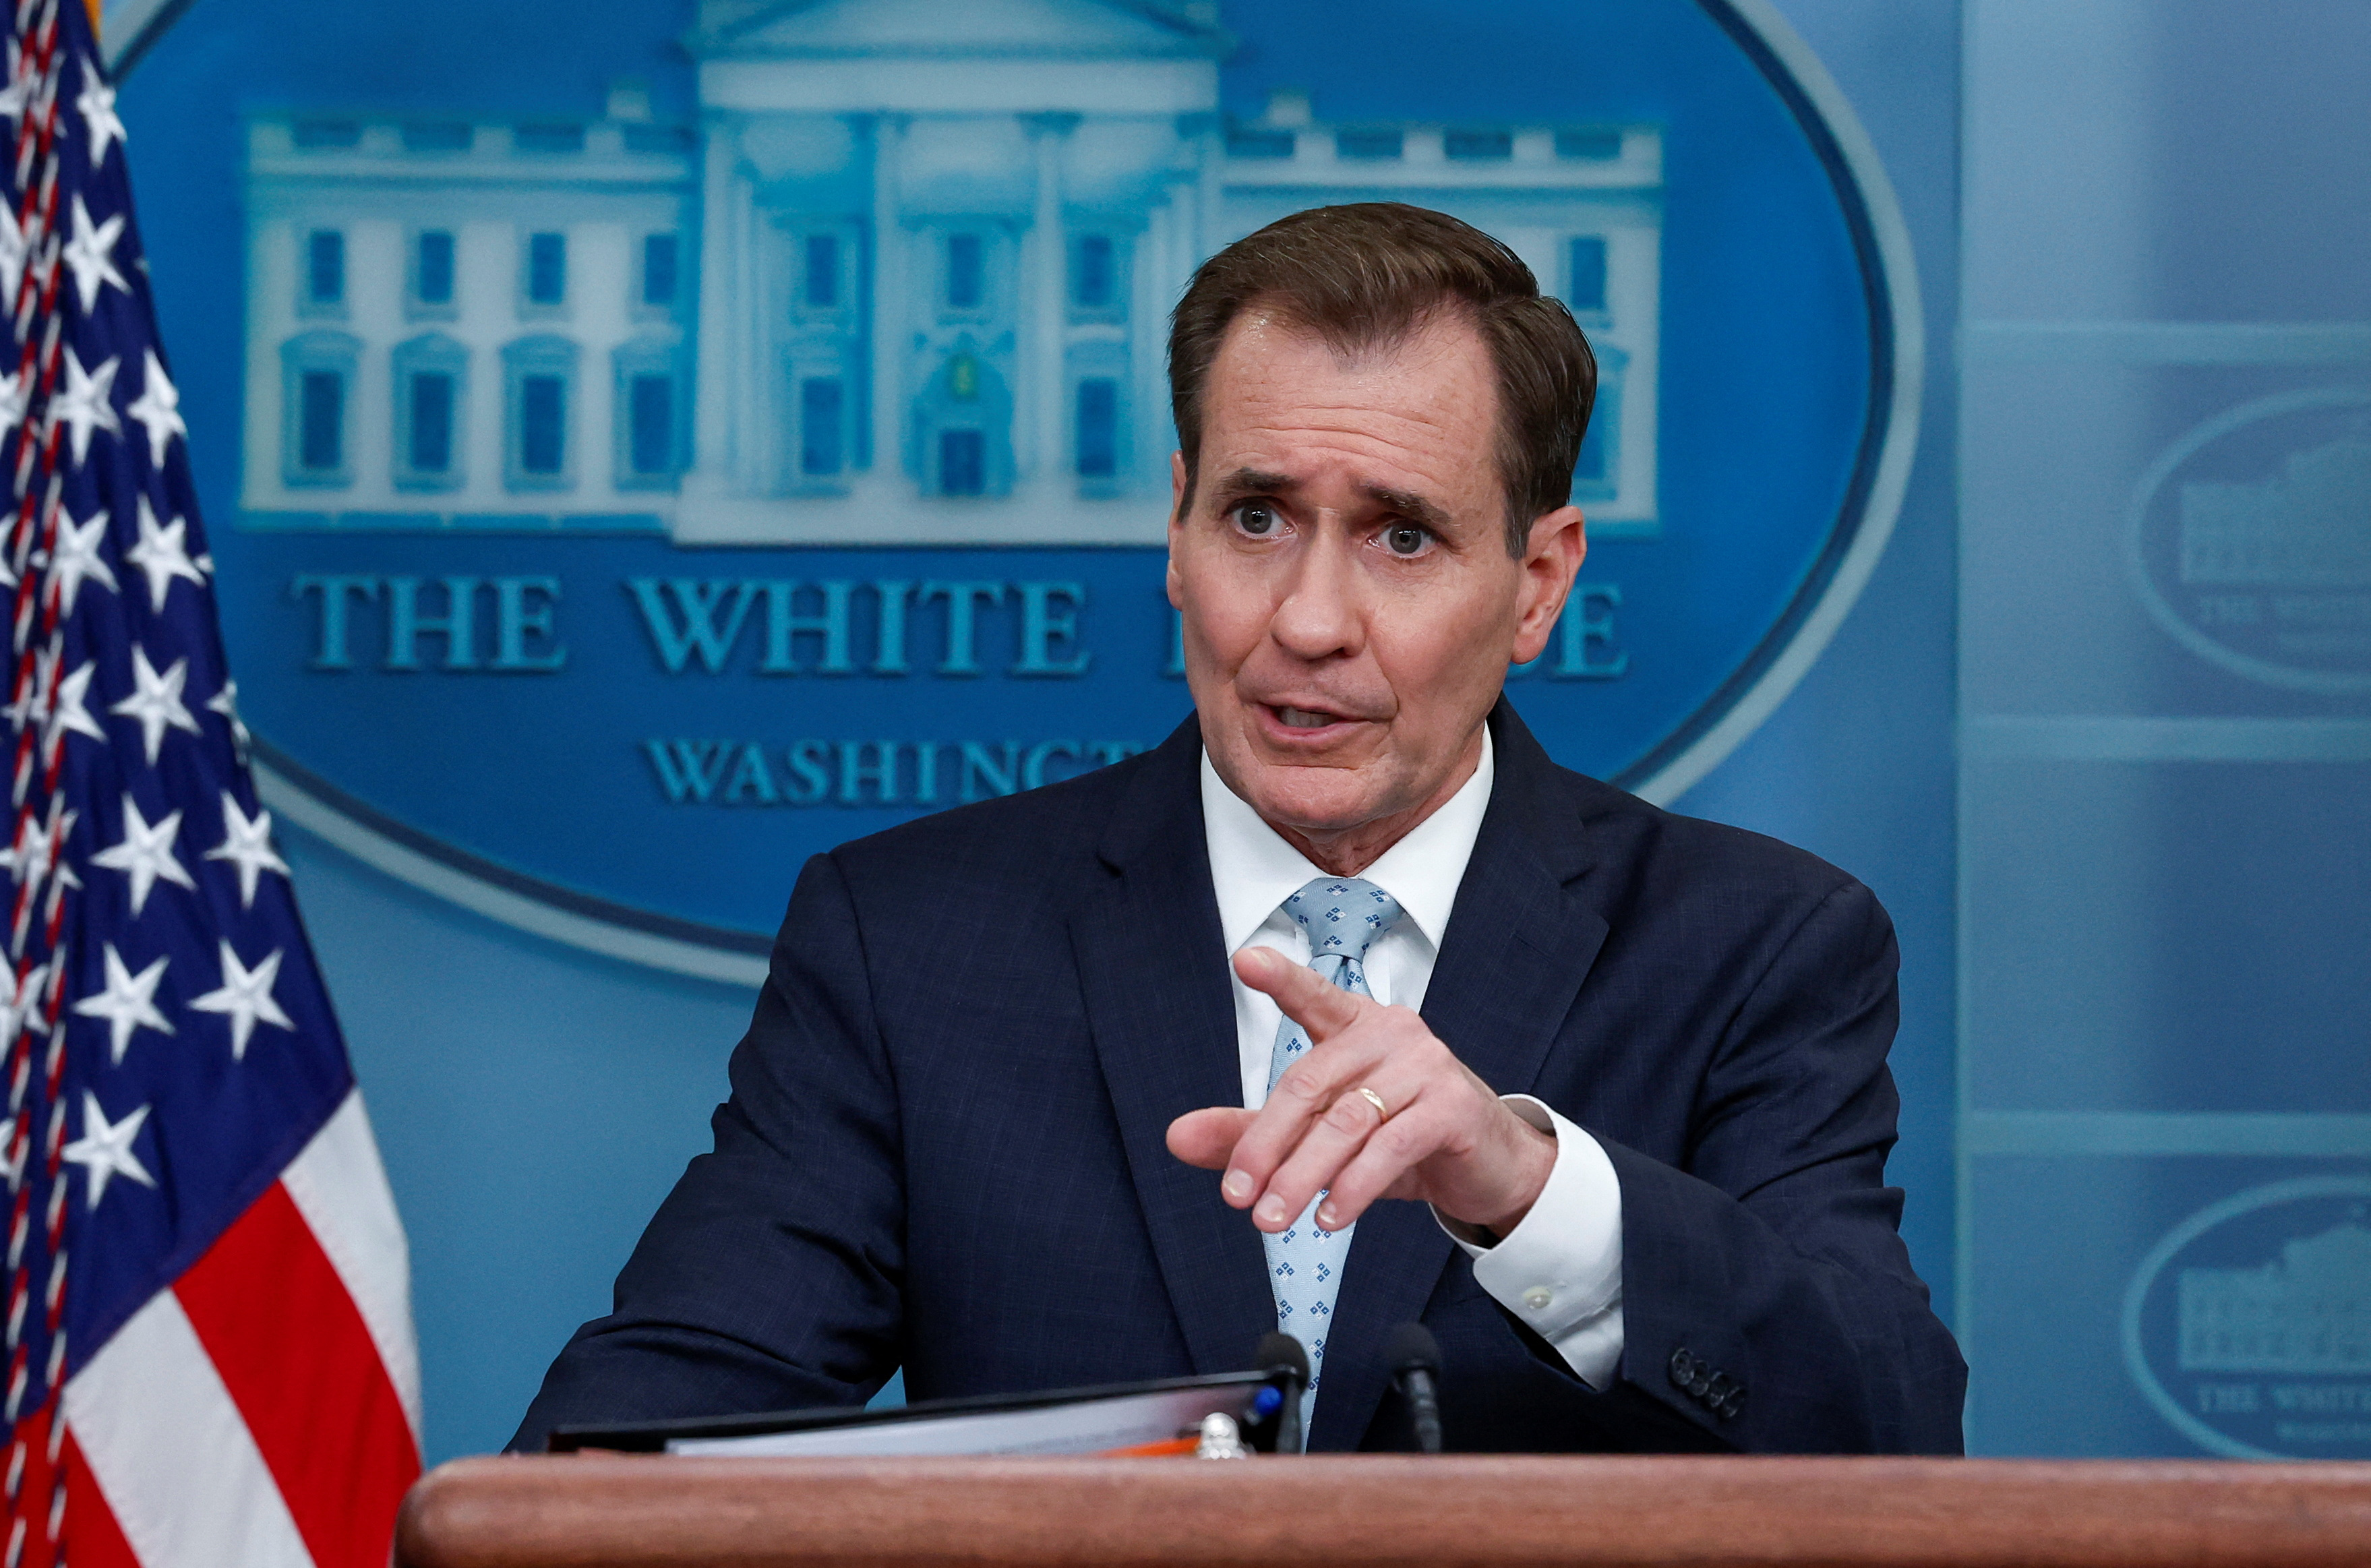 John Kirby, National Security Council Coordinator for Strategic Communications, answers questions during the daily press briefing at the White House in Washington, U.S., February 13, 2023. REUTERS/Evelyn Hockstein